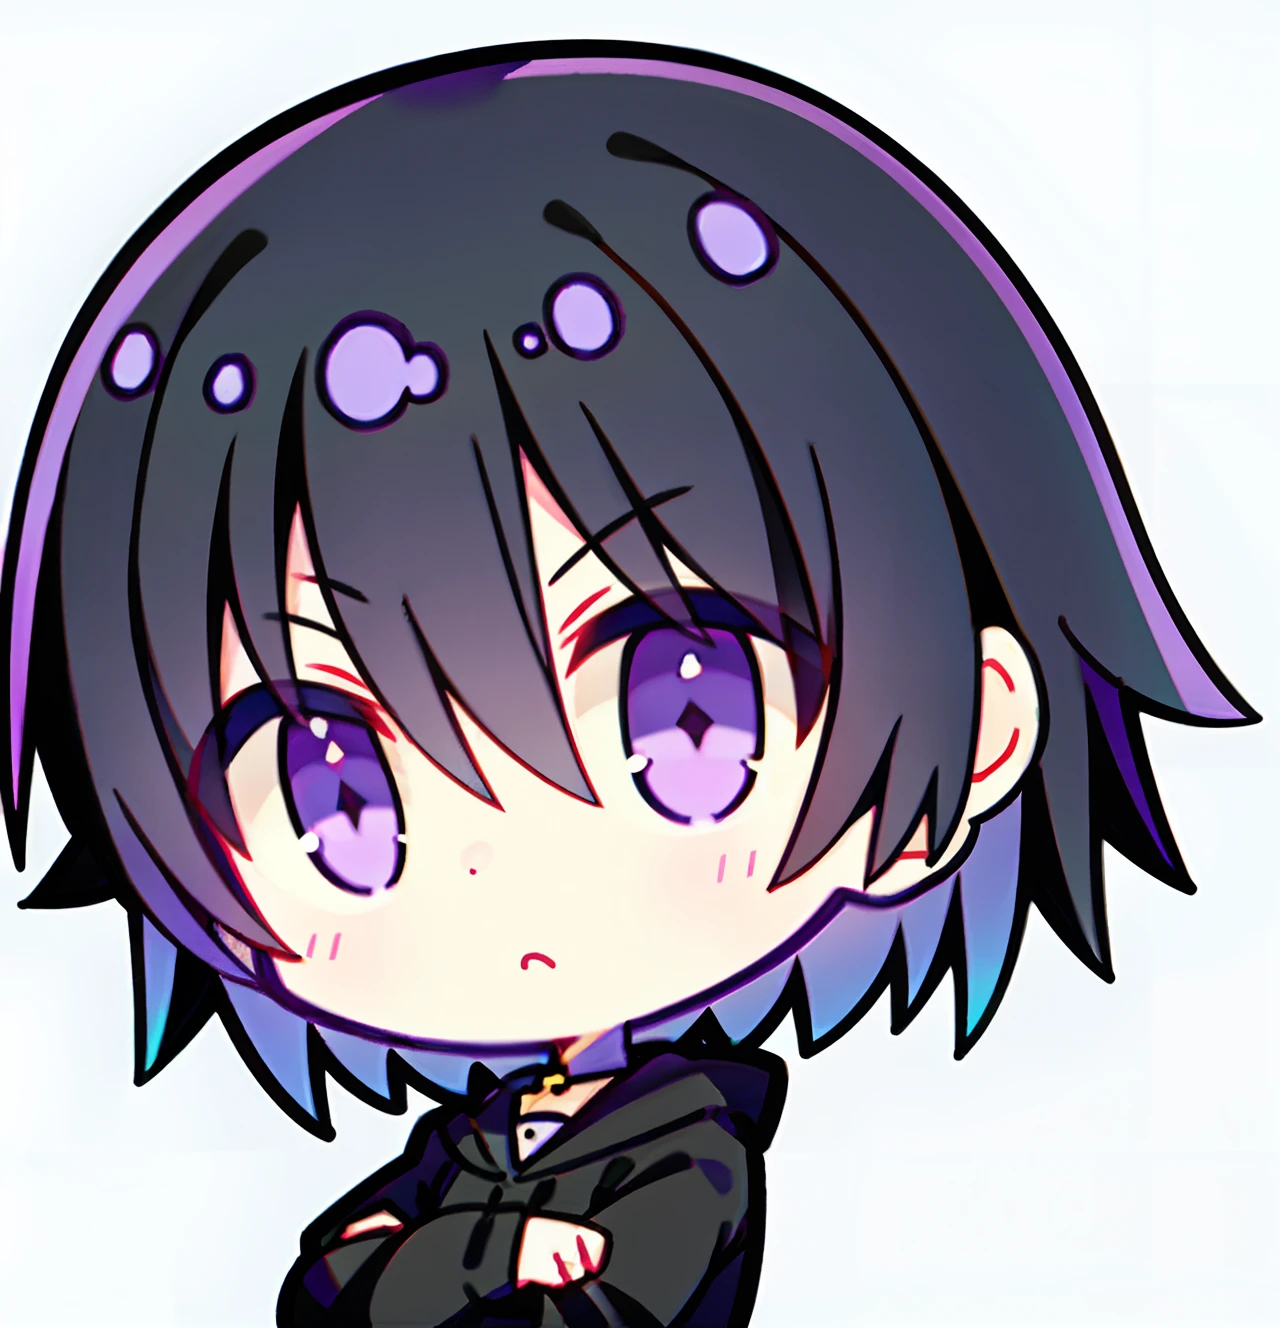 Short black hair，A little boy with purple eyes，It's kind of cute，Serious eyes